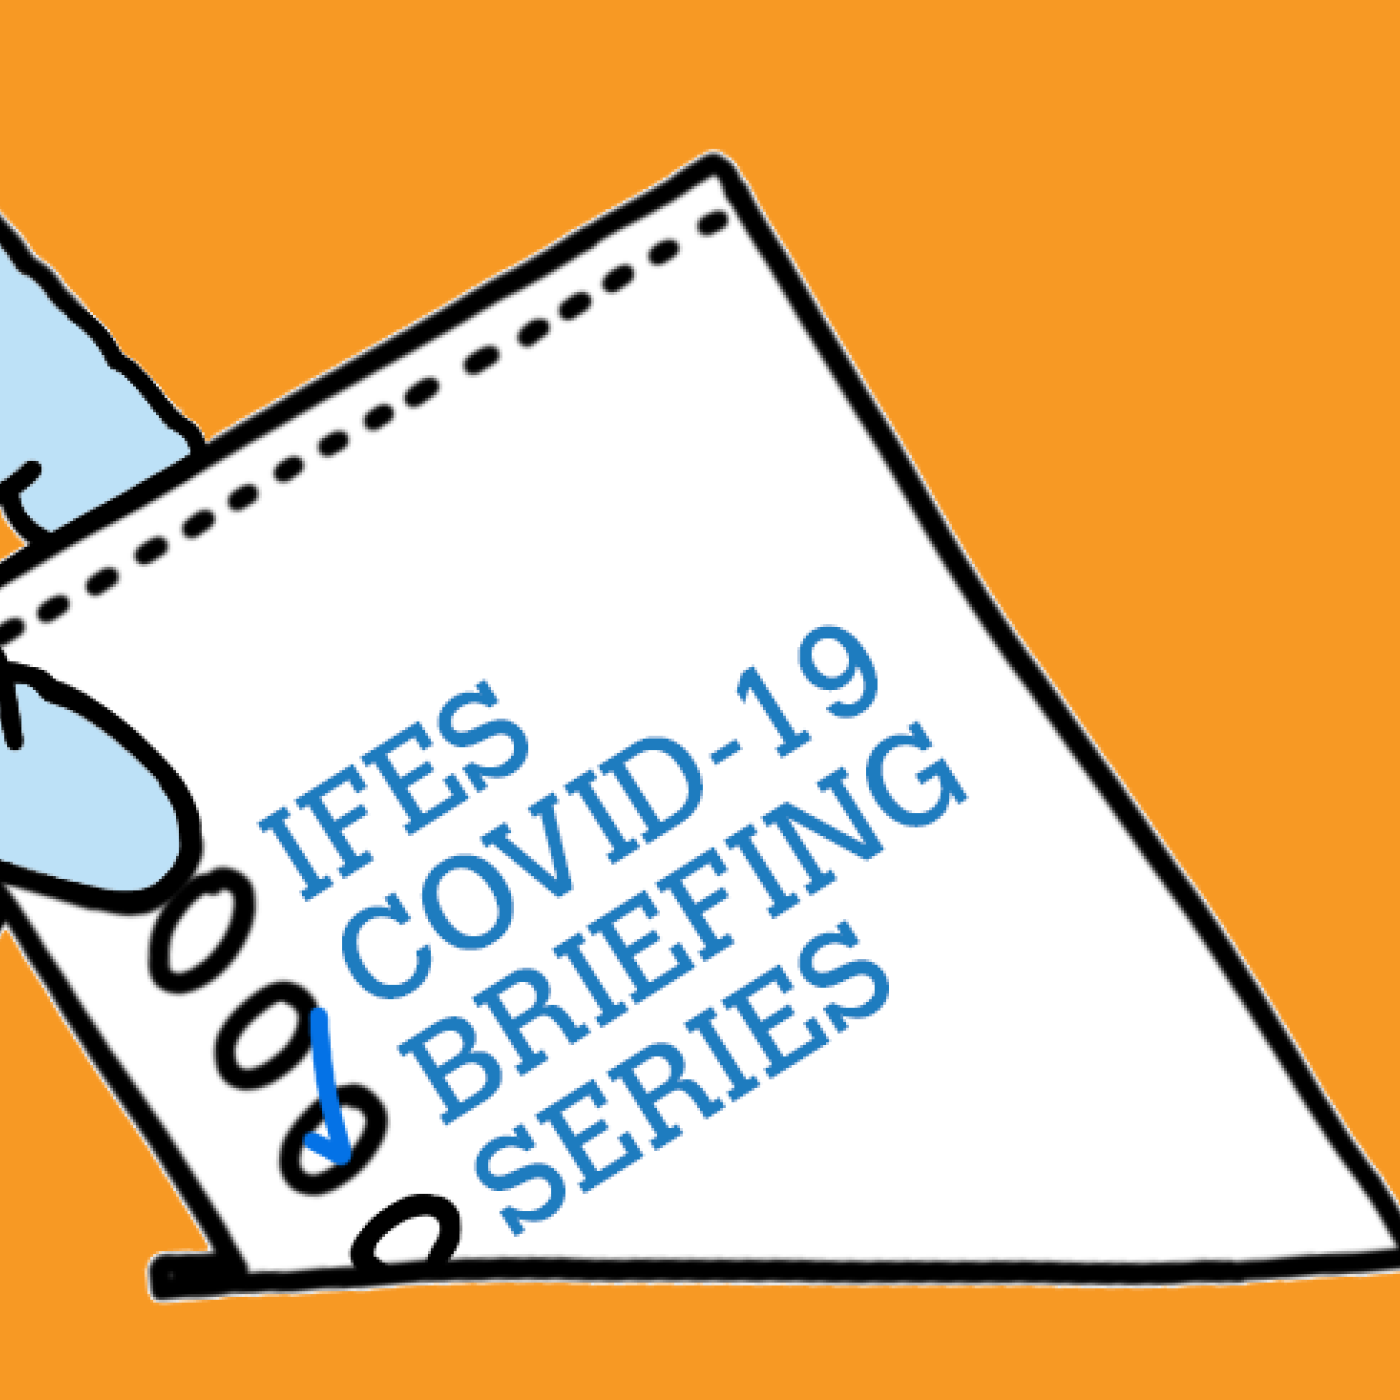 IFES COVID Briefing Series banner